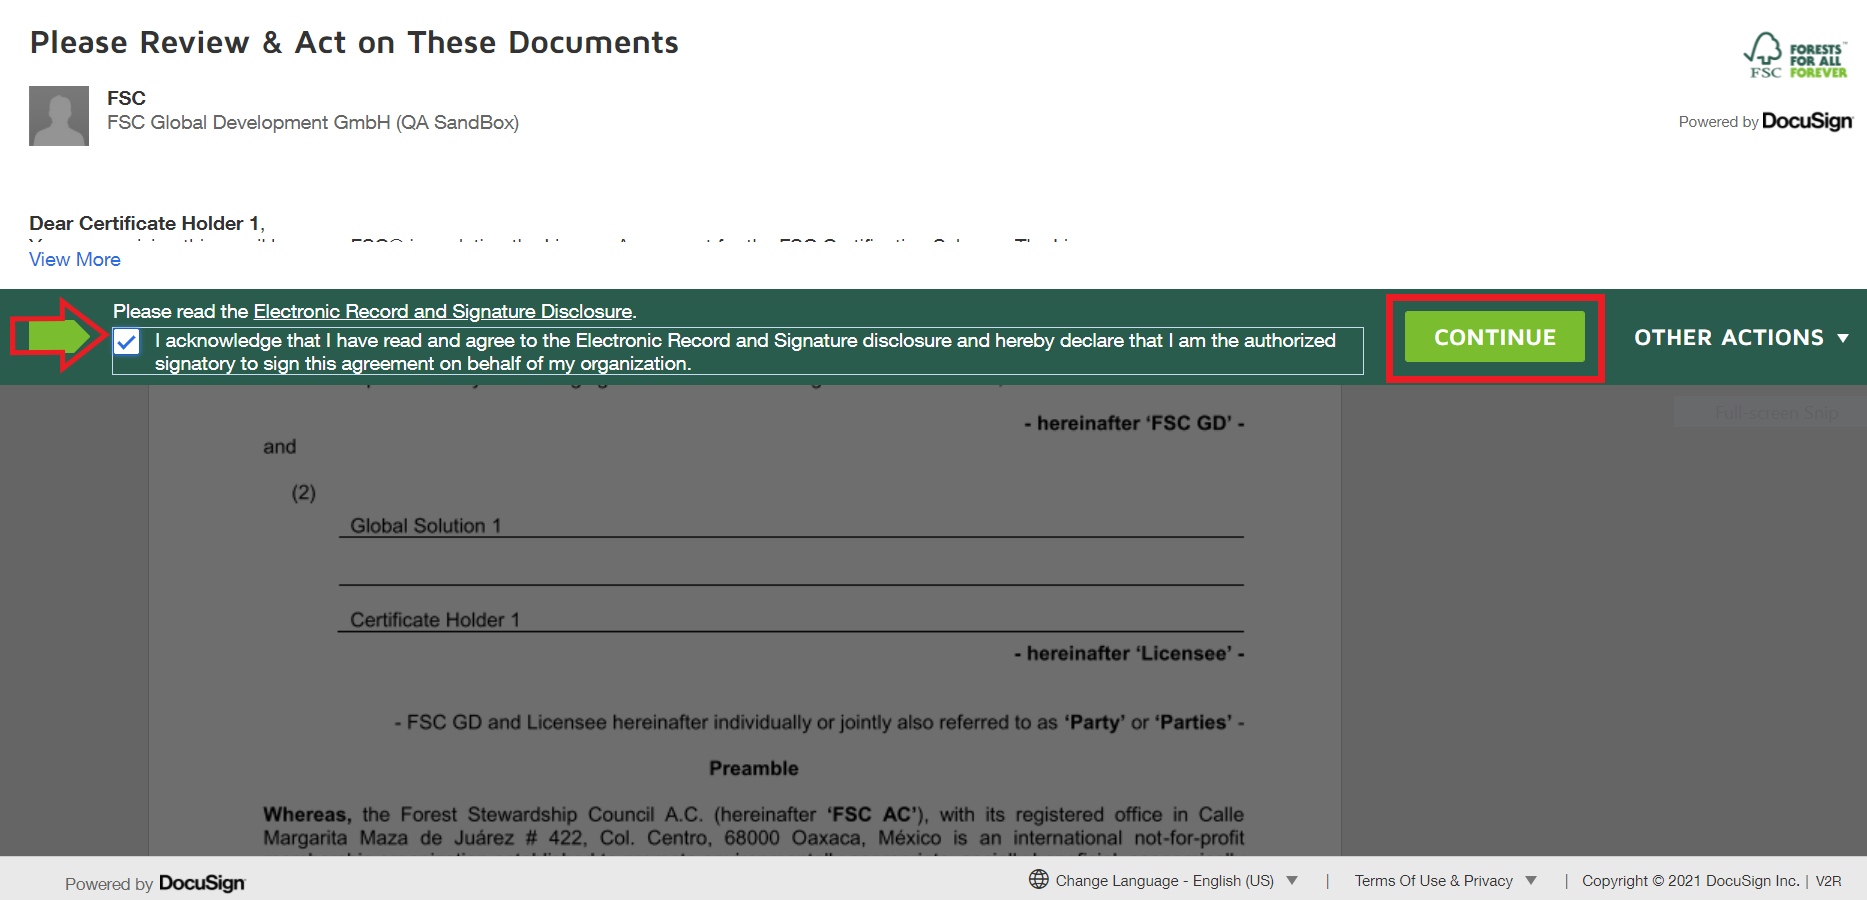 read the electronic record and signature disclosure